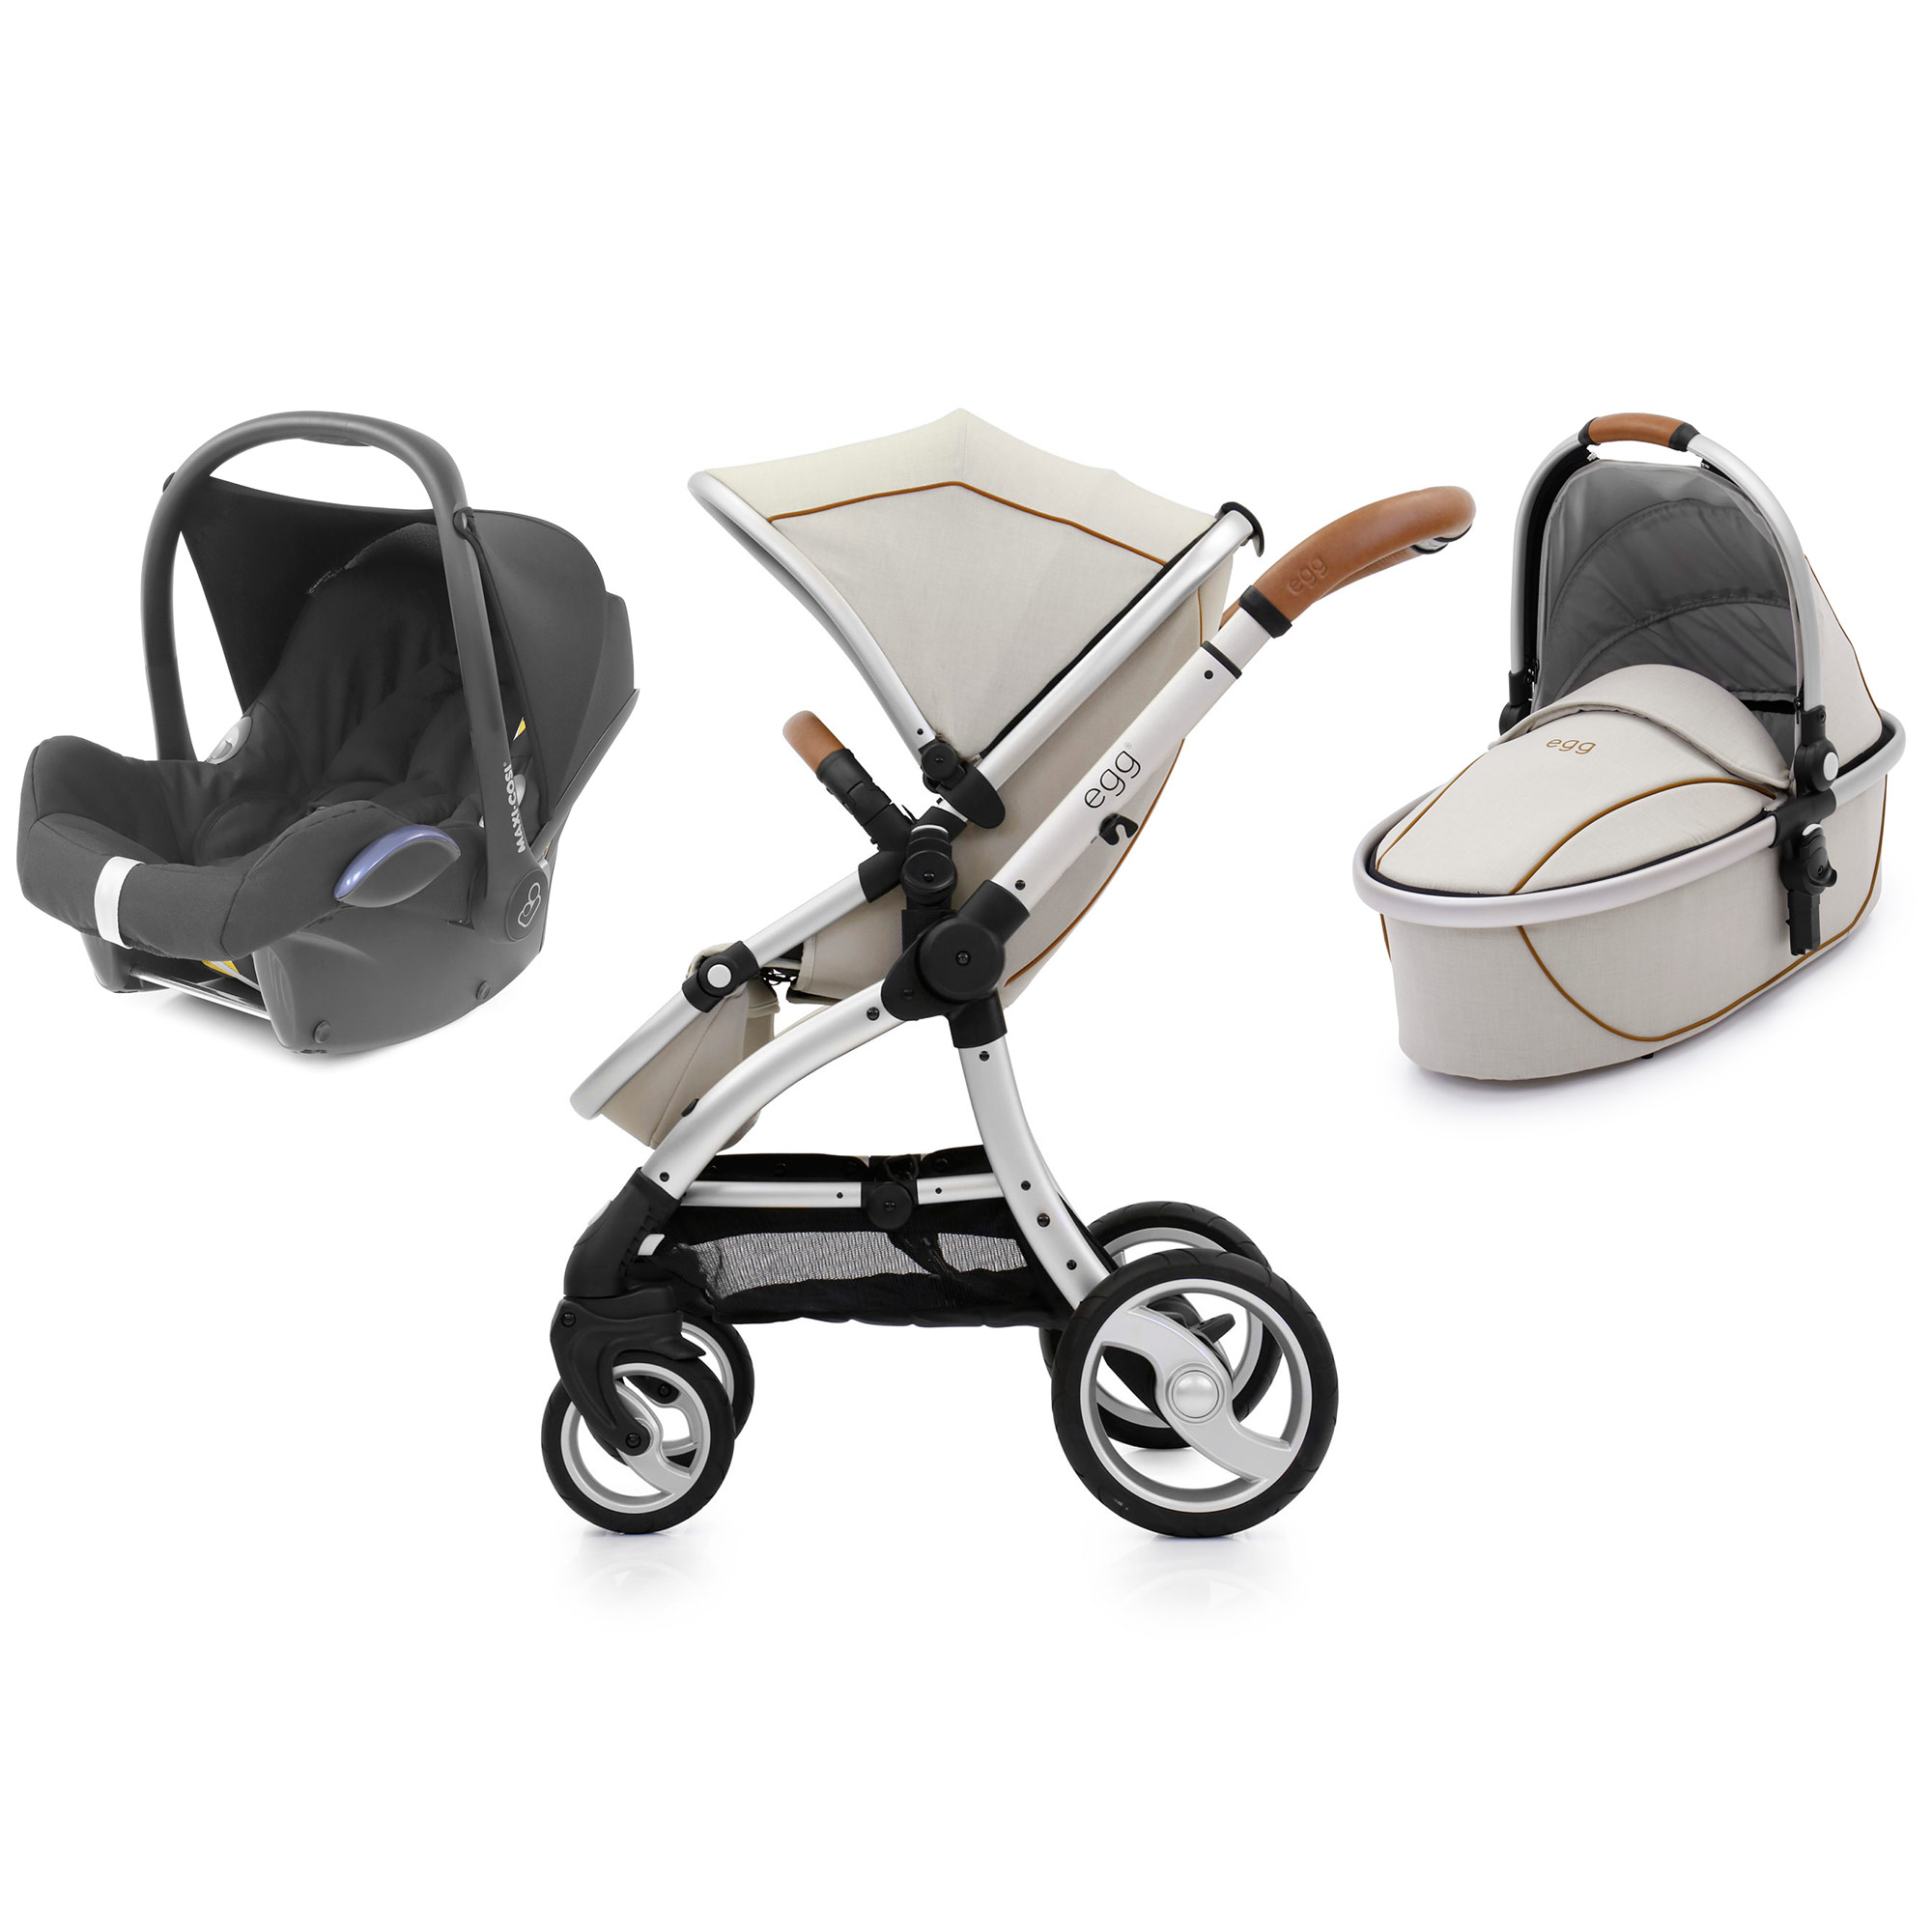 egg stroller with car seat